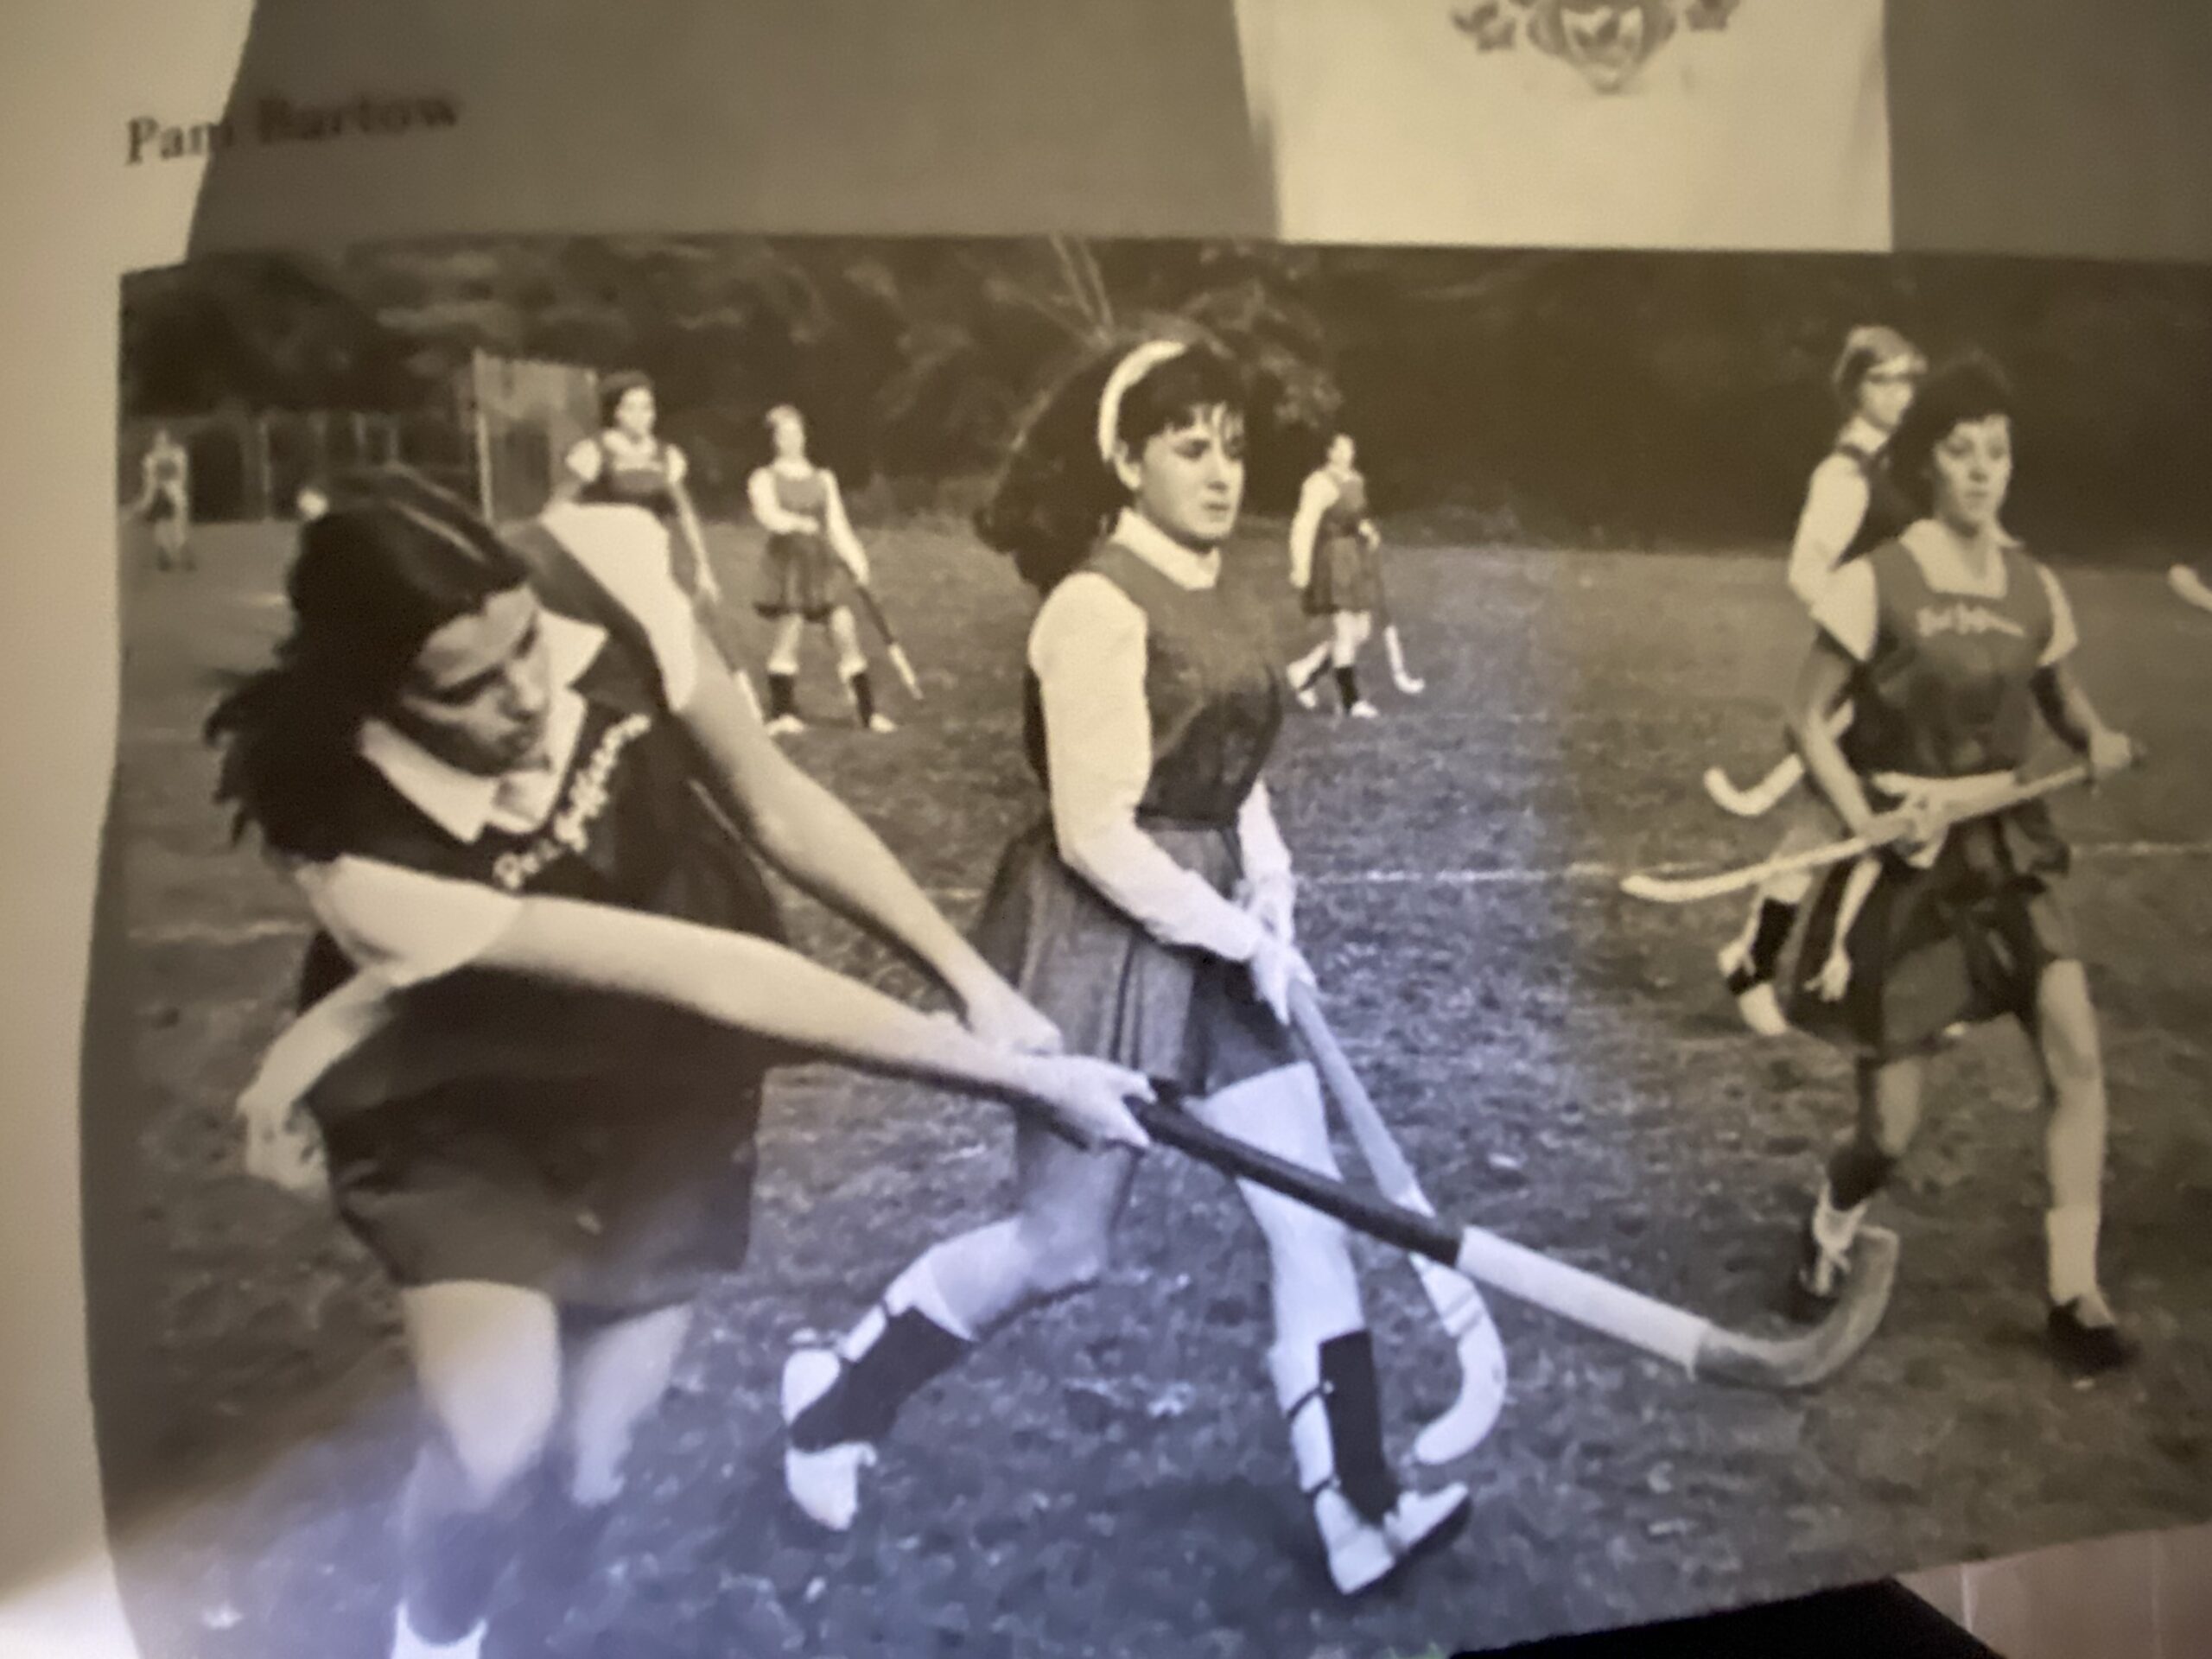 Debbie Jayne playing field hockey for Port Jefferson High School, in the days before Title IX existed.